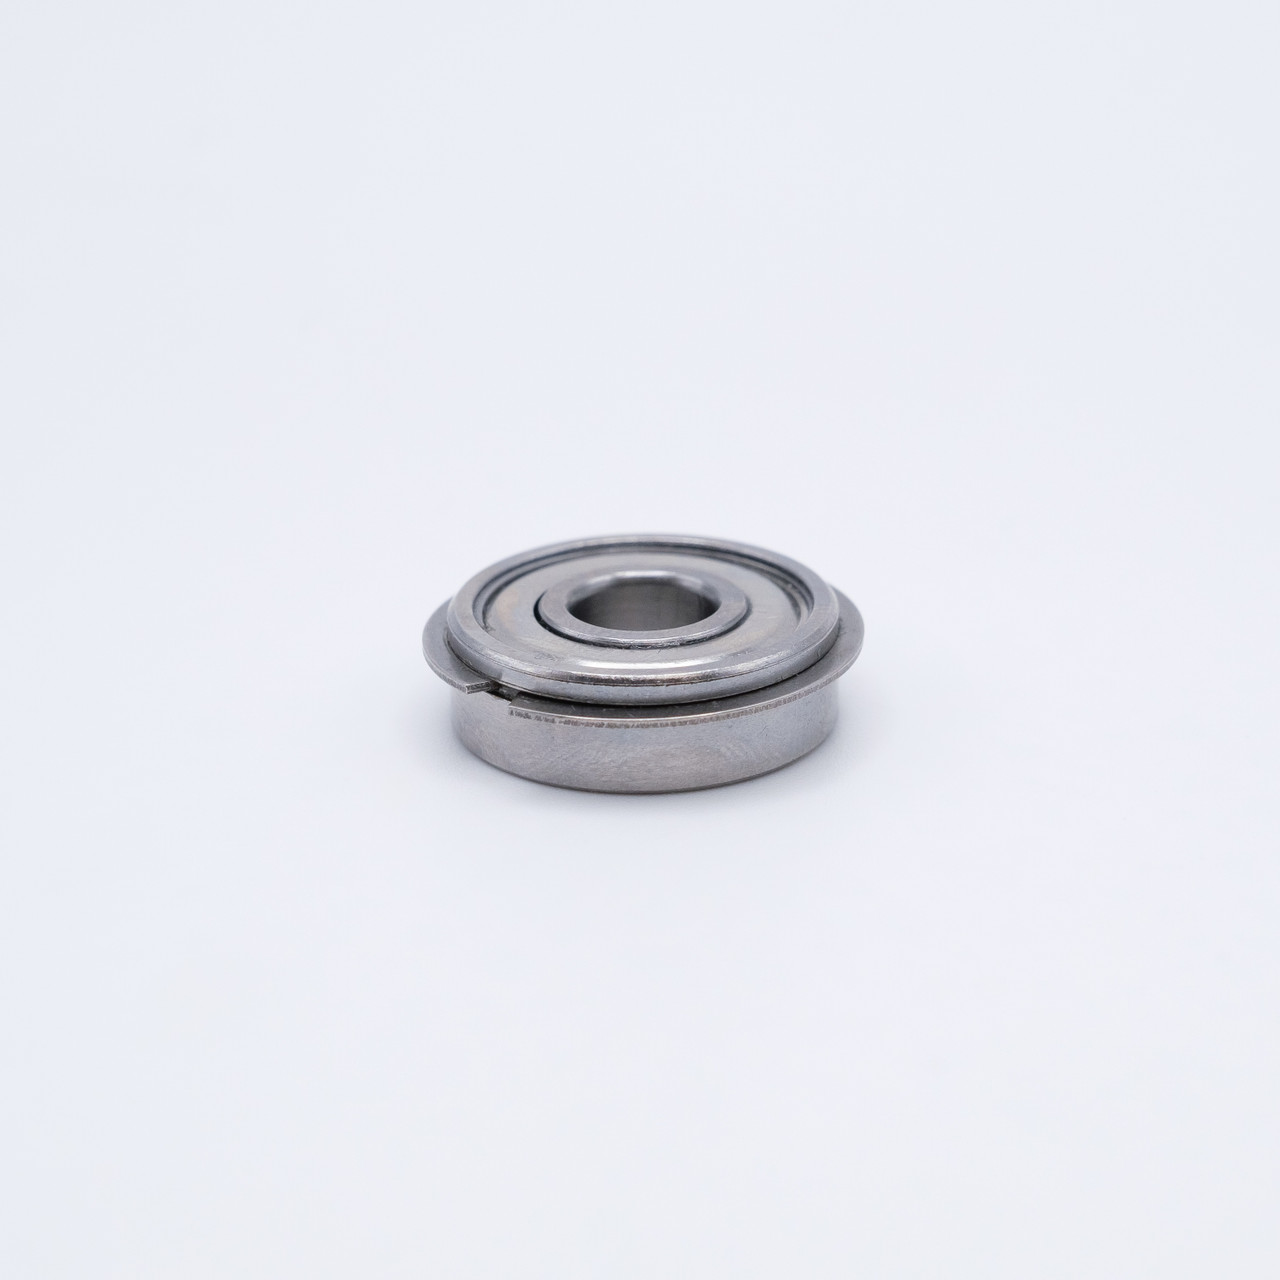 QU50157 Transfer Case Ball Bearing with Snap Ring